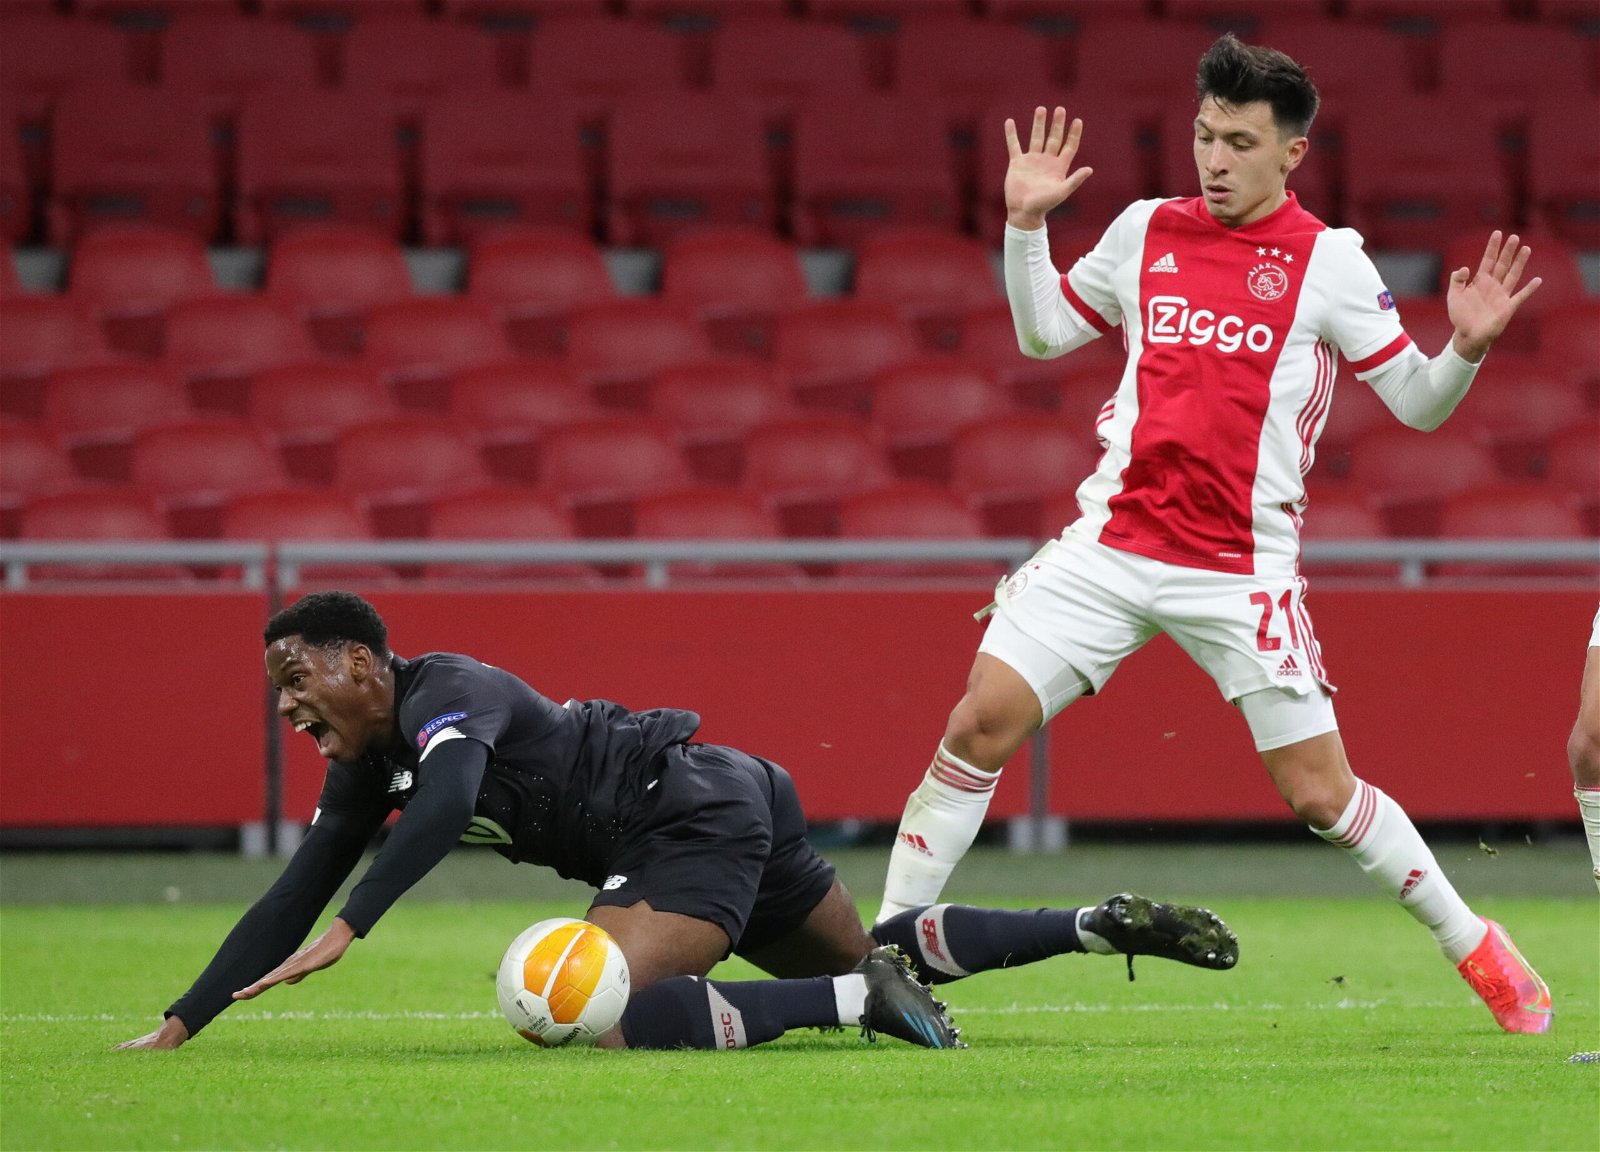 Lisandro-Martinez-in-UEFA-Champions-League-action-for-Ajax-against-LOSC-Lille